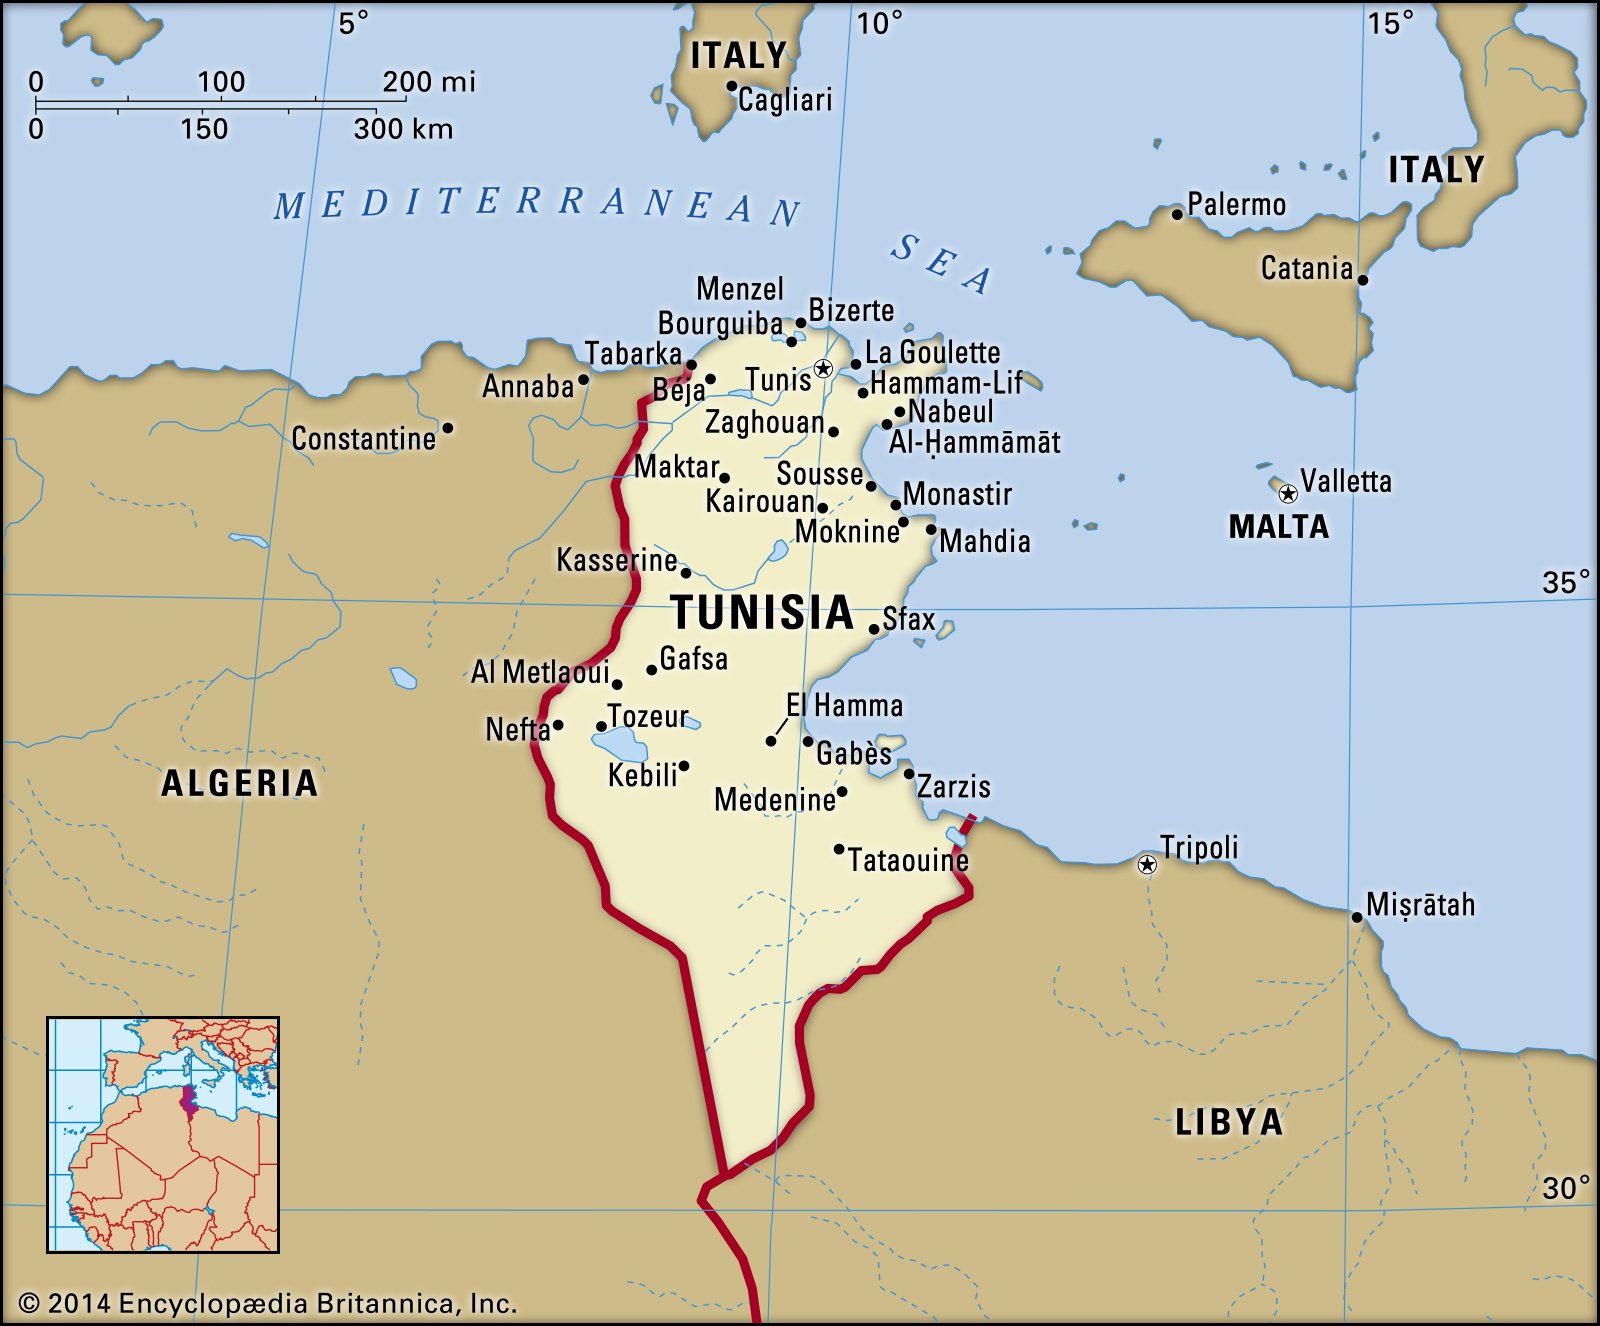 Dead bodies in desert after Tunisia expels black Africans